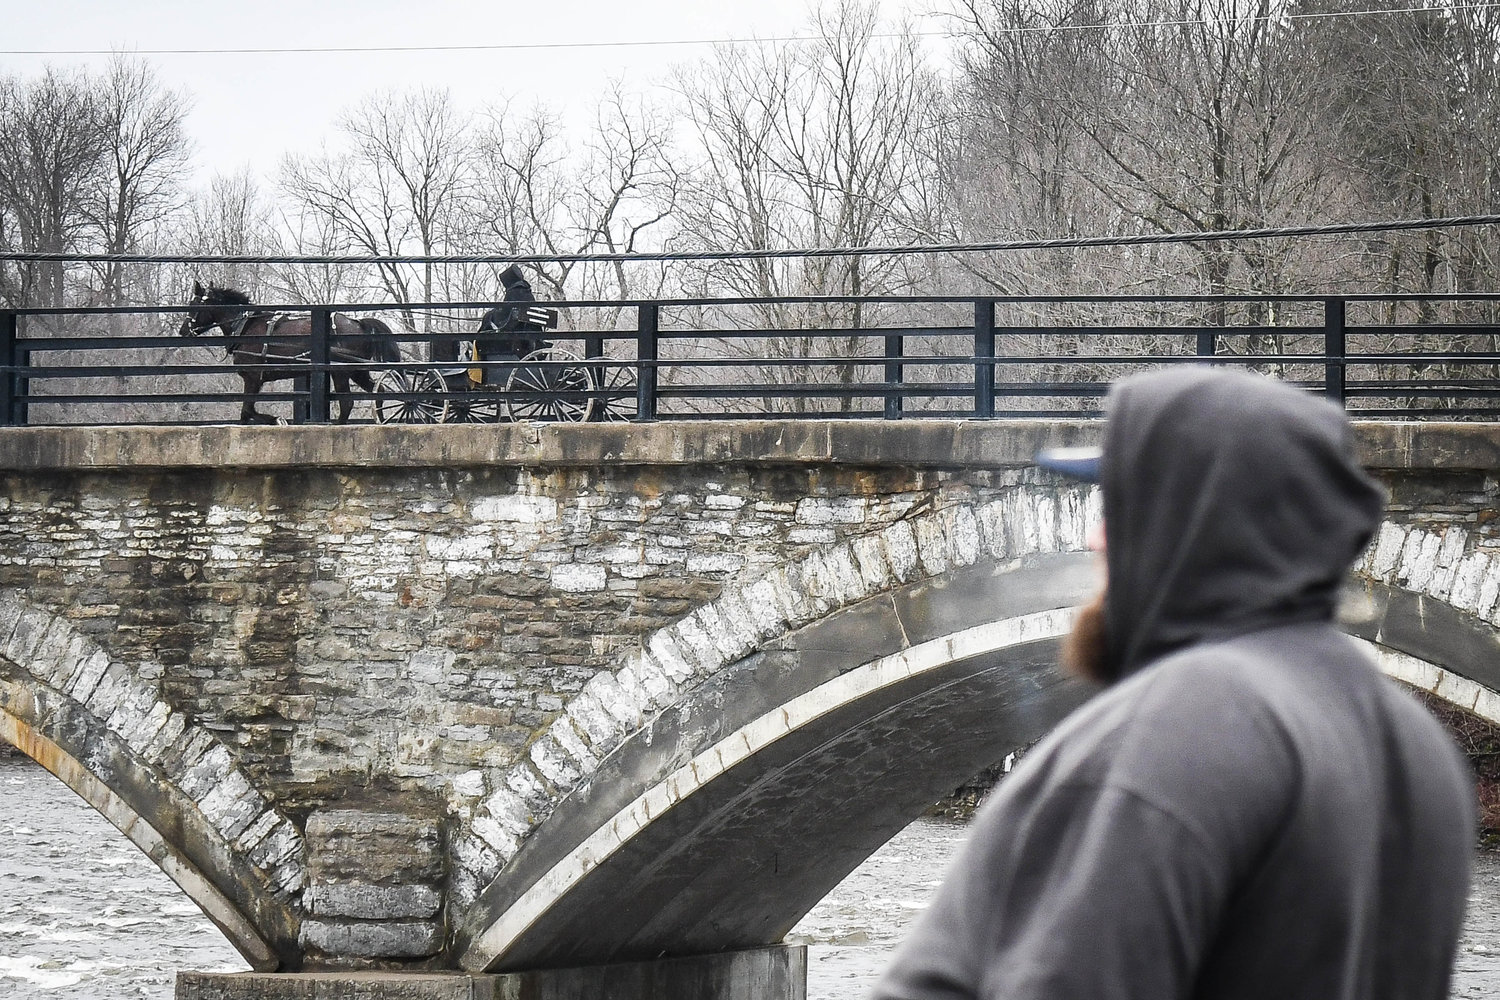 An amish buggy passes by as anglers go fishing near the Newport Stone Arch Bridge during opening day for trout season on Friday morning.